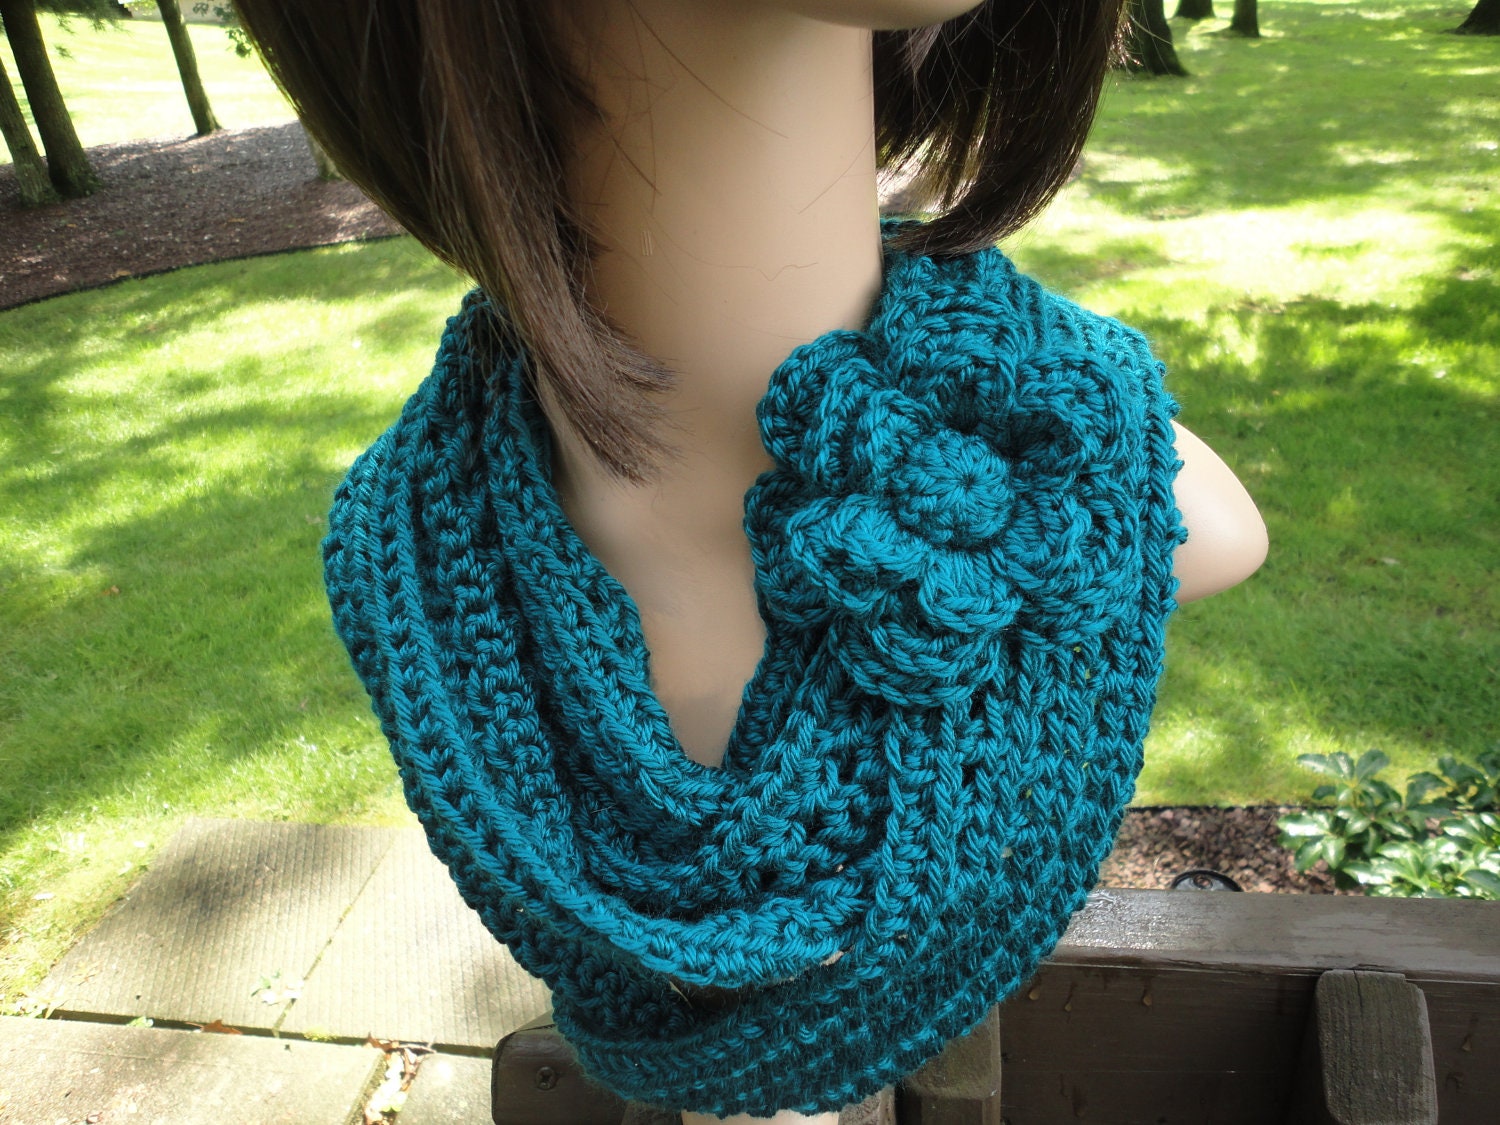 Teal Crochet Scarf with Flower Brooch Pin